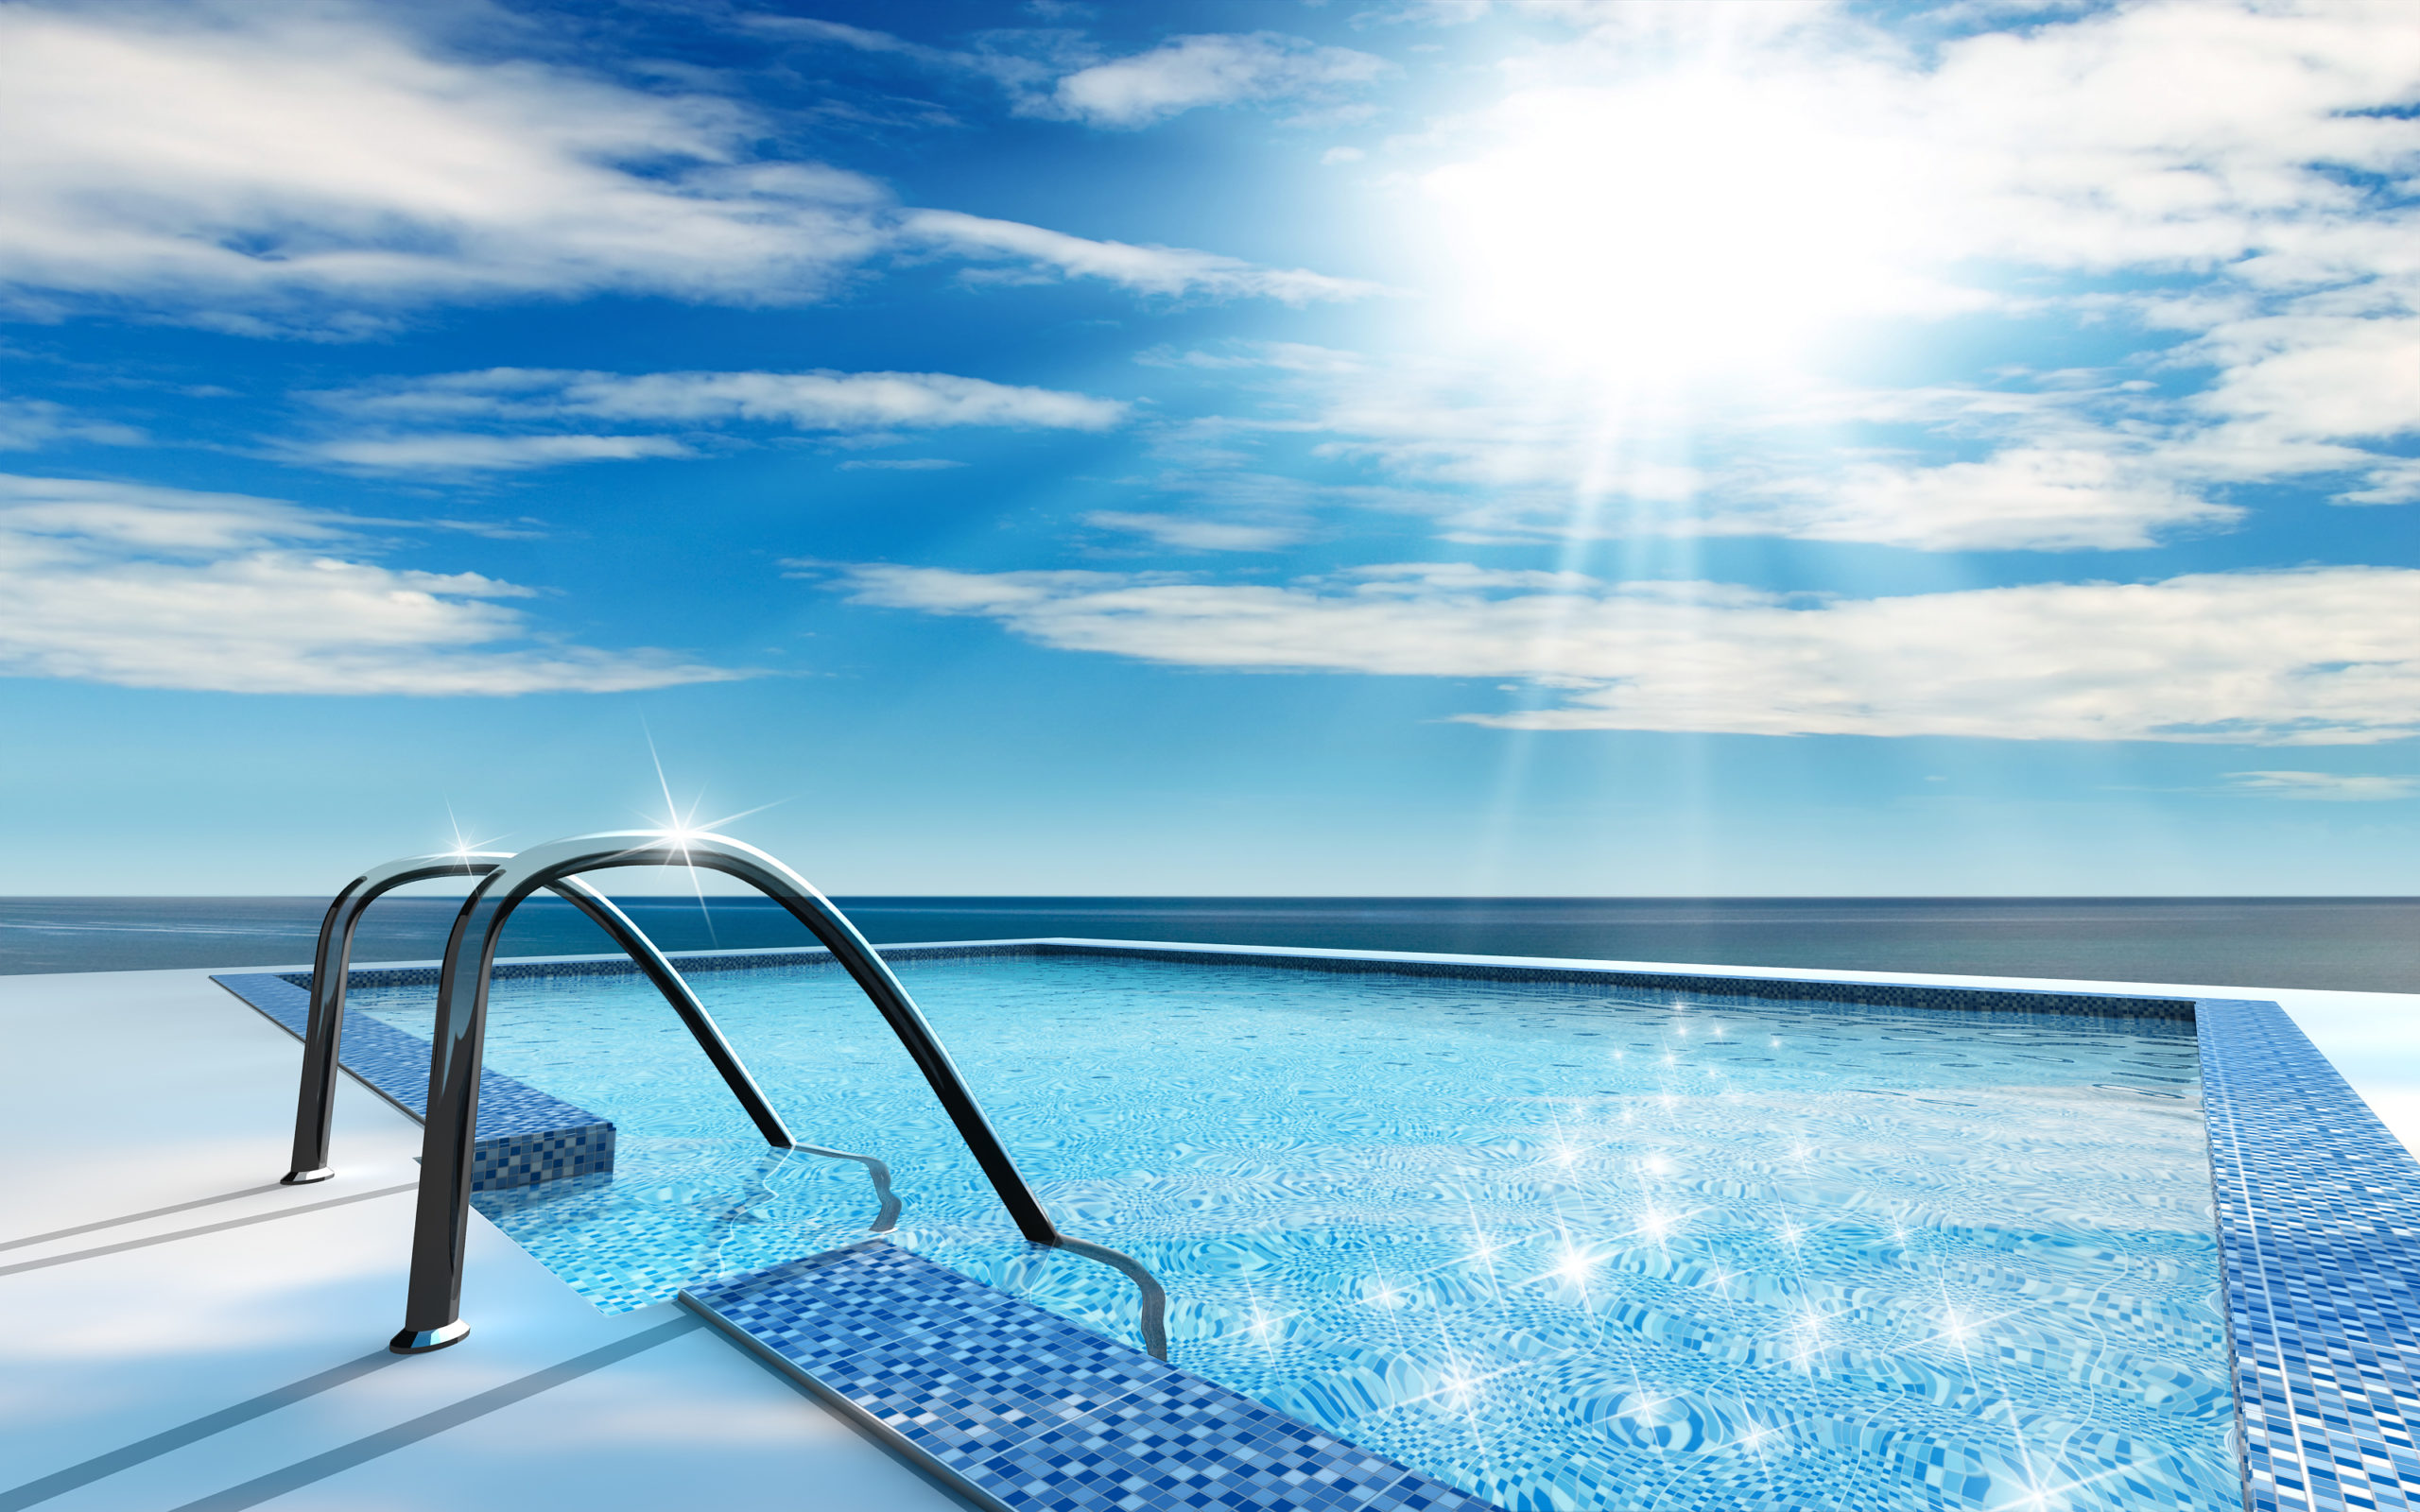 Sunlight illuminating a pool, causing it to sparkle and shimmer, creating a beautiful and inviting scene.